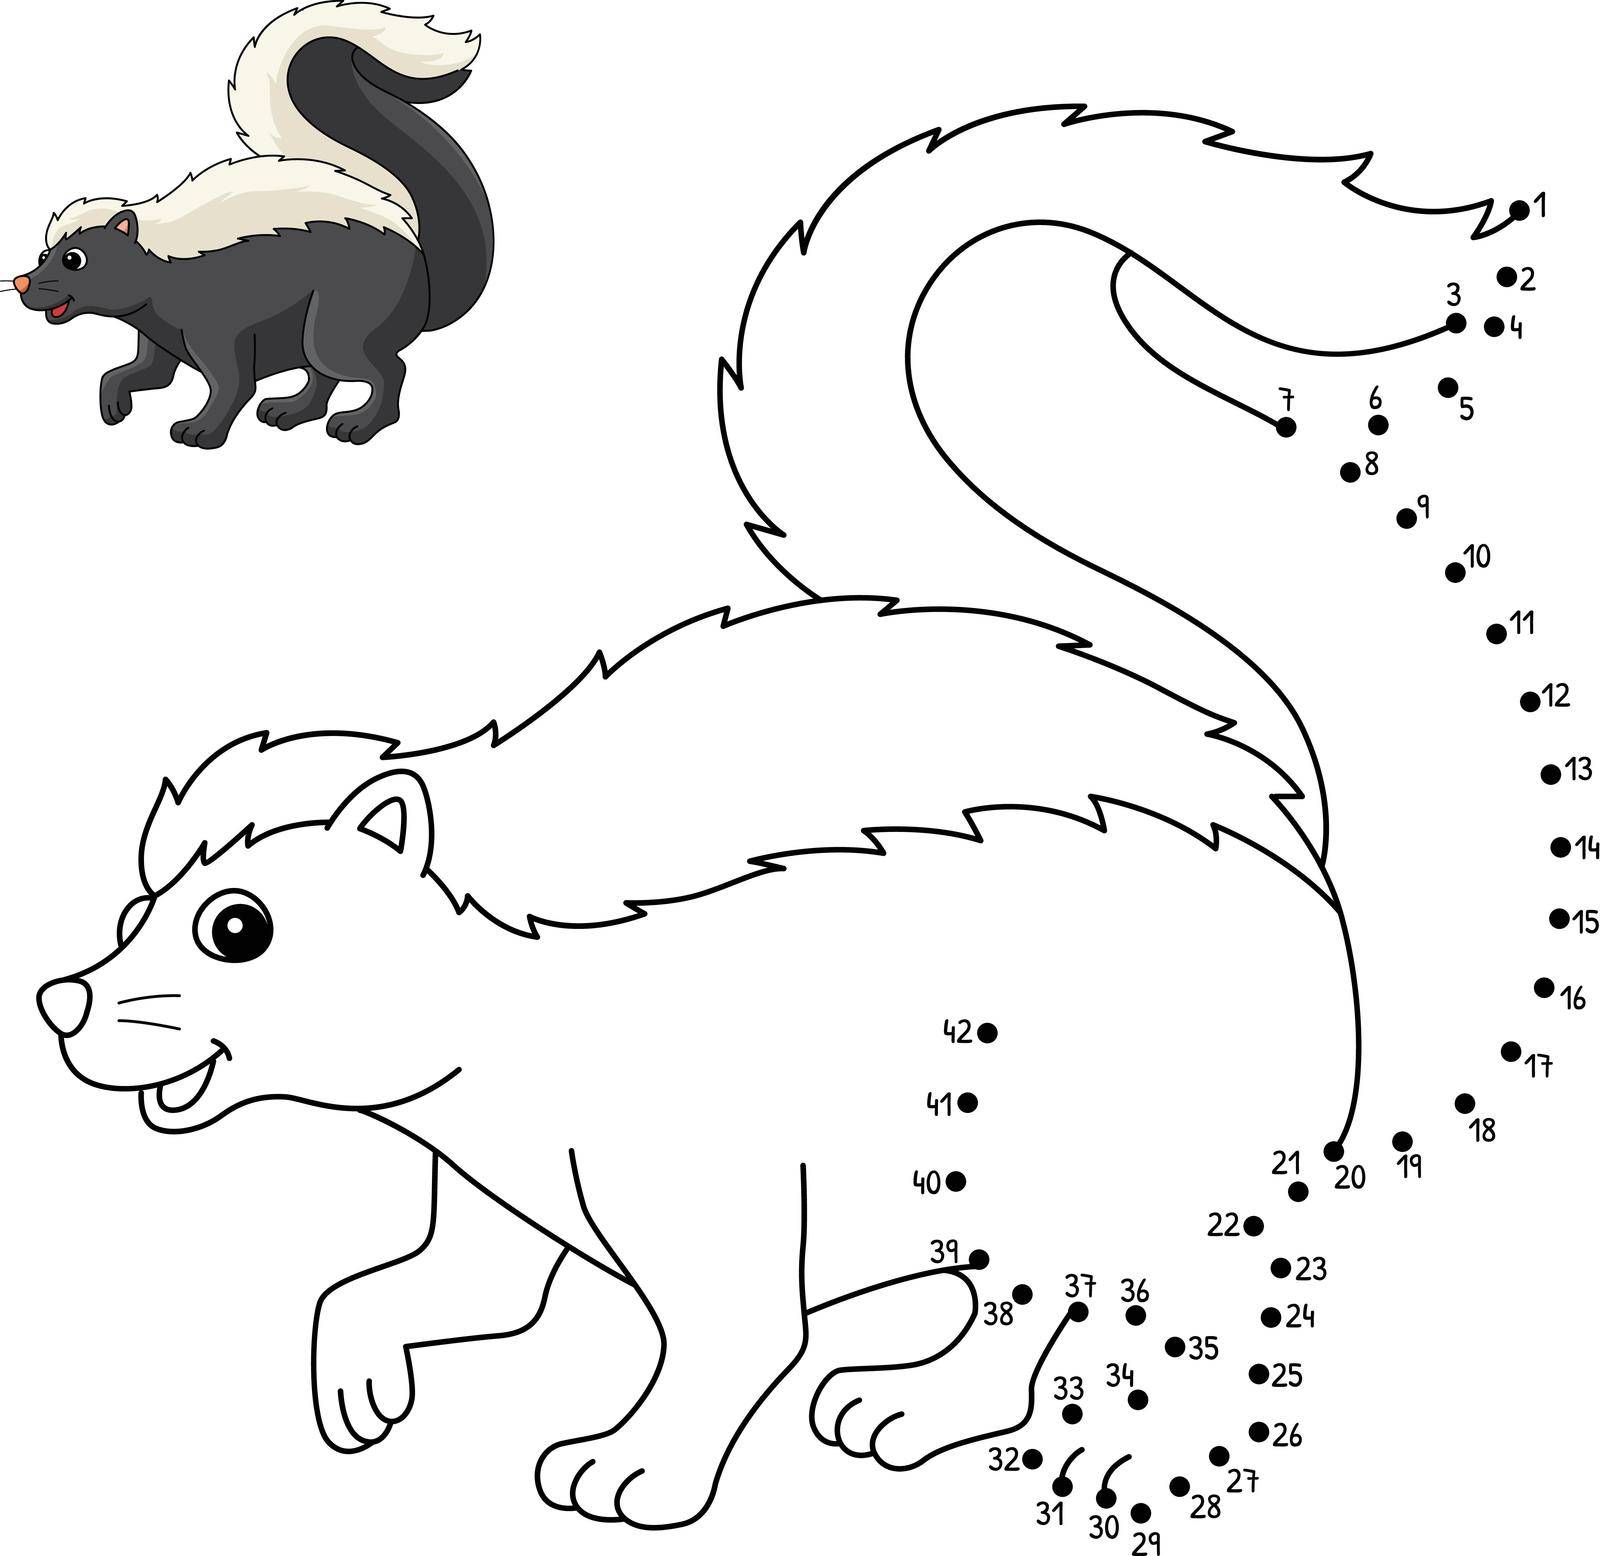 A cute and funny connect-the-dots coloring page of a Skunk Animal. Provides hours of coloring fun for children. Color, this page is very easy. Suitable for little kids and toddlers.